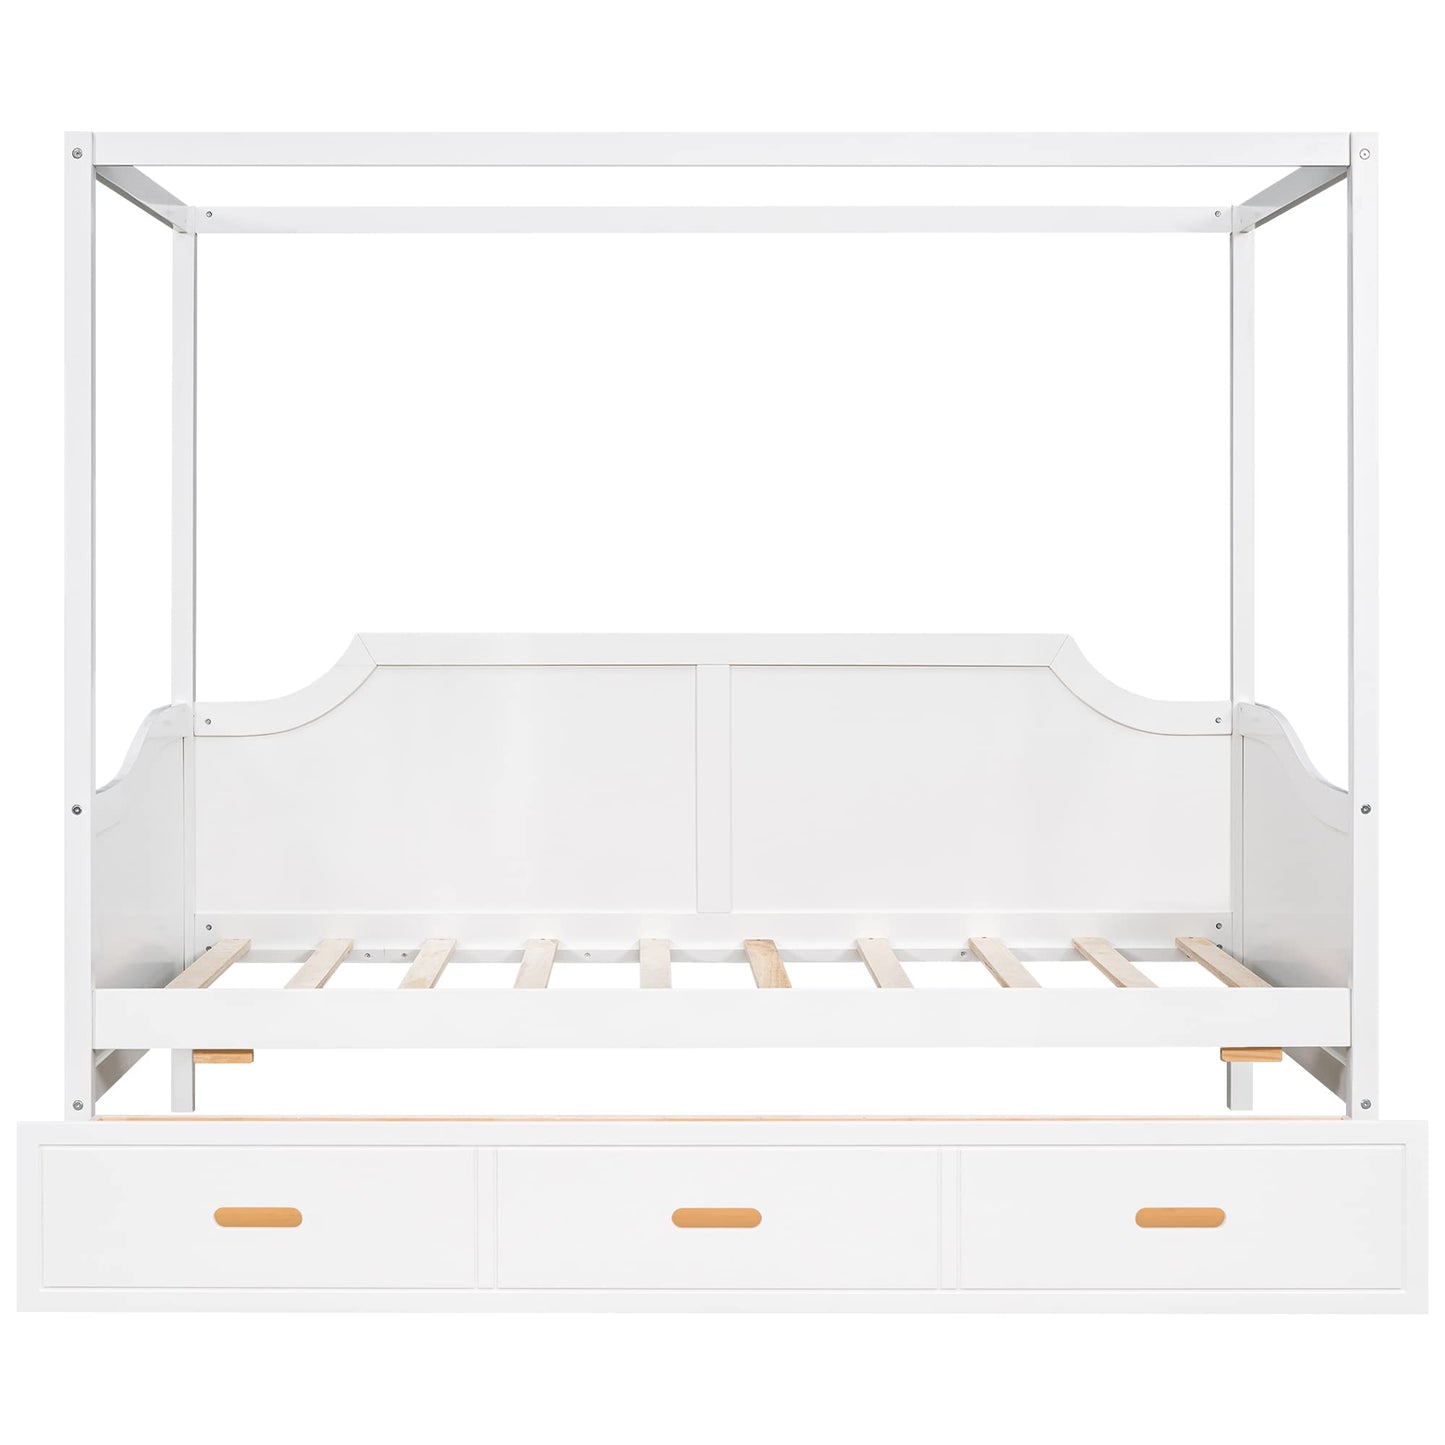 Polibi Wooden Daybed, Twin Size Canopy Daybed with 3 in 1 Drawers (White)